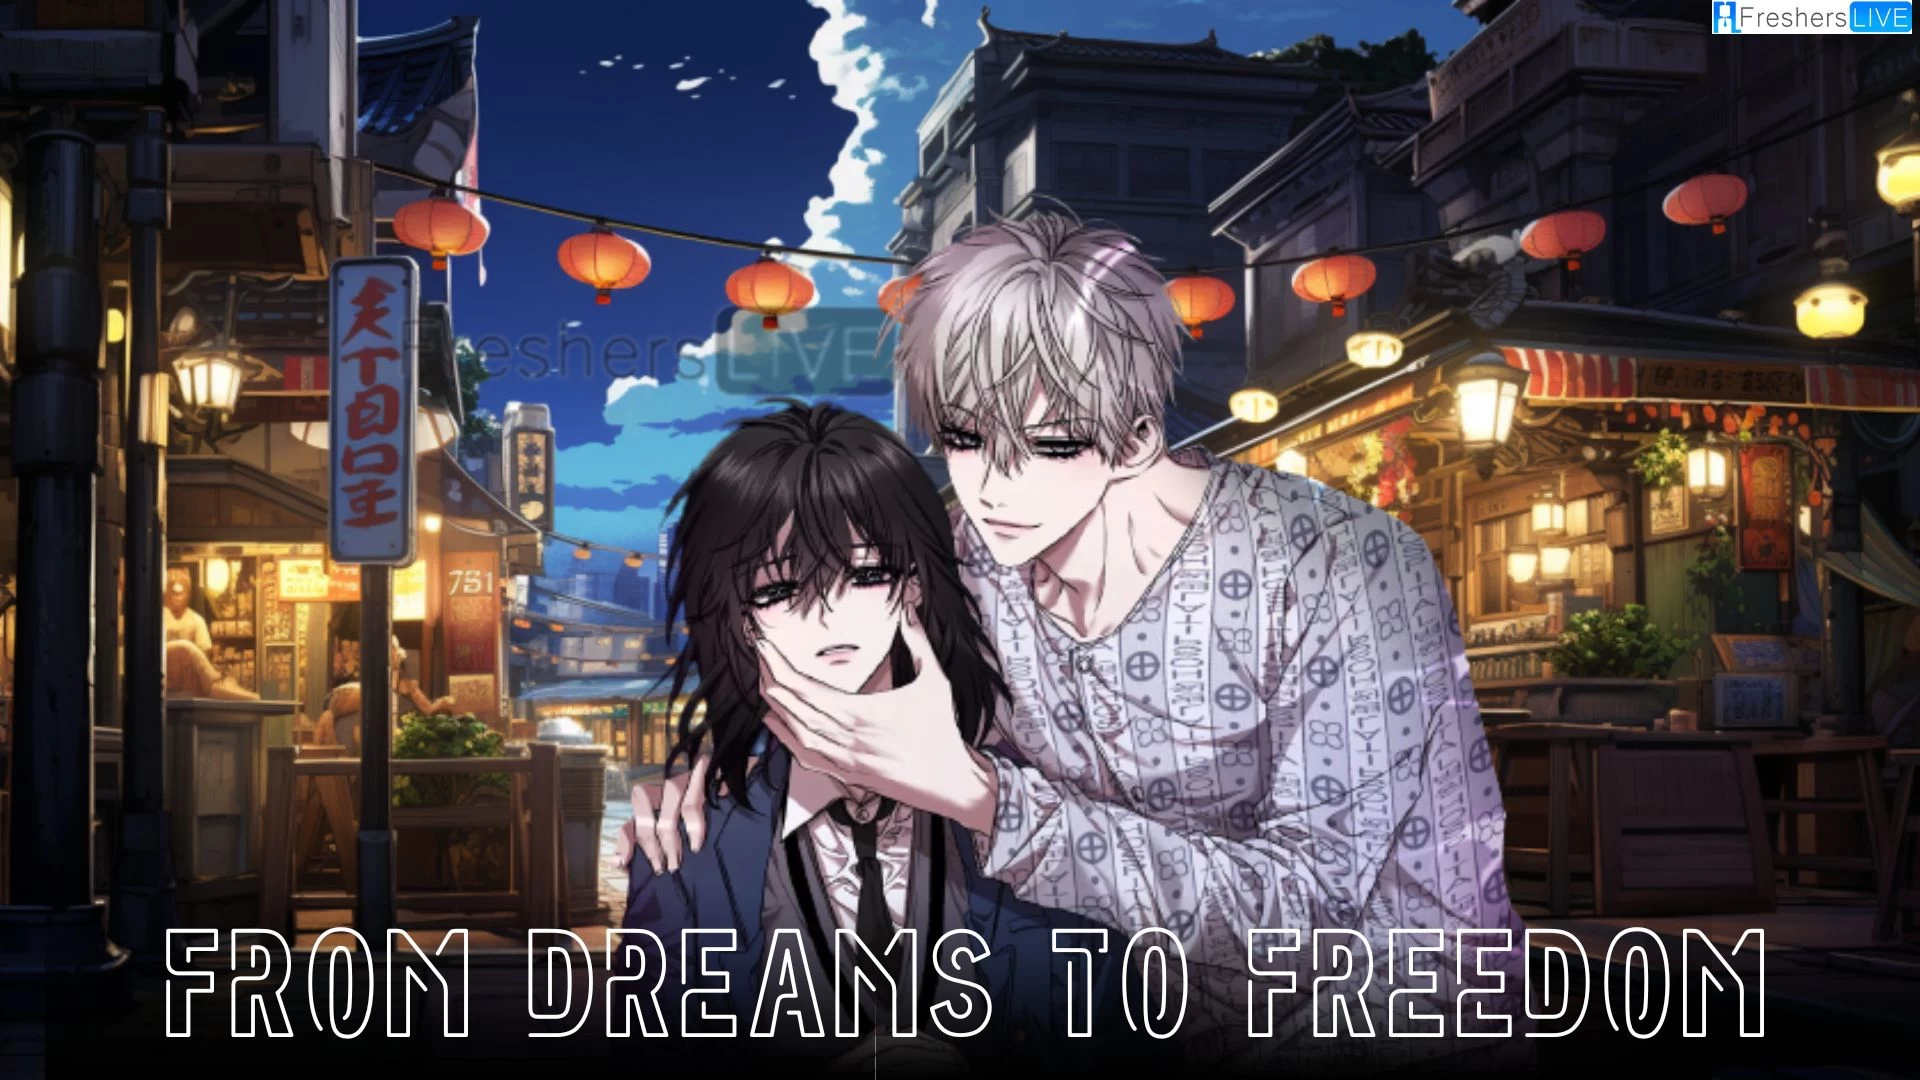 From Dreams to Freedom Chapter 109 Release Date, Spoiler, Raw Scan, and Where to Read From Dreams to Freedom Chapter 109?